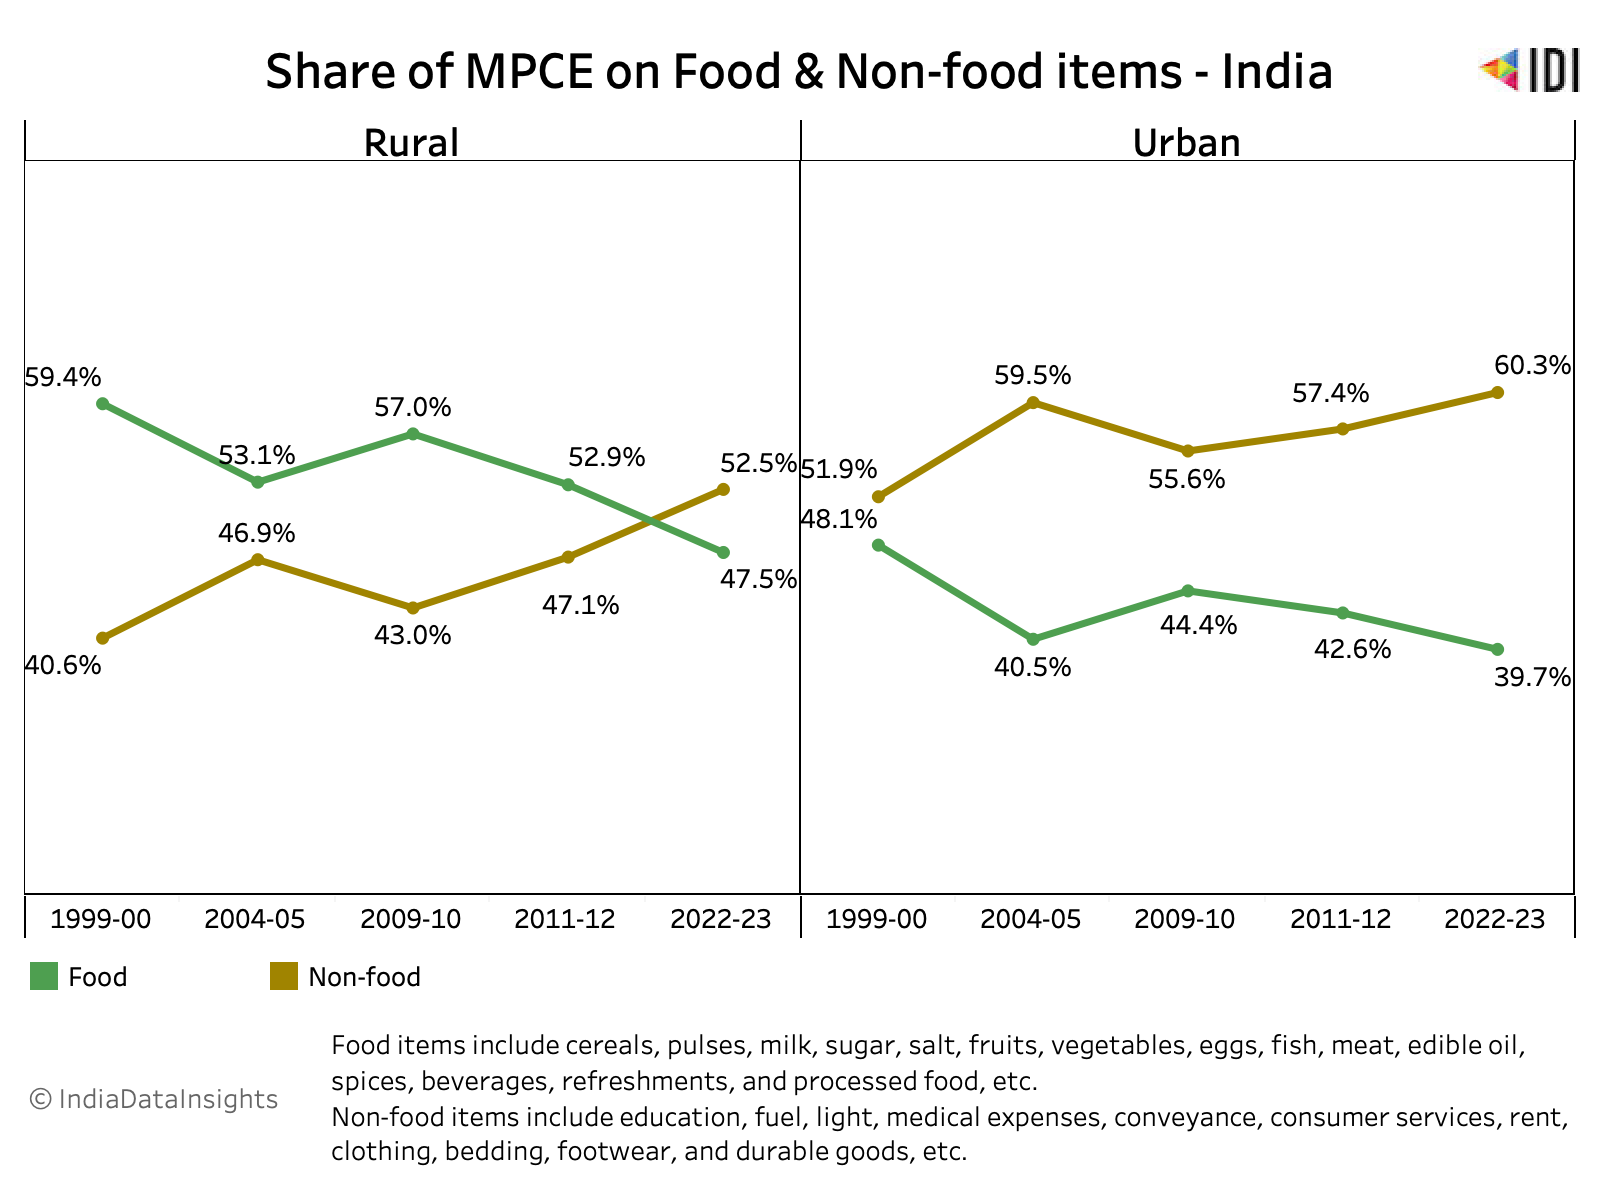 Share of MPCE across food and non-food category